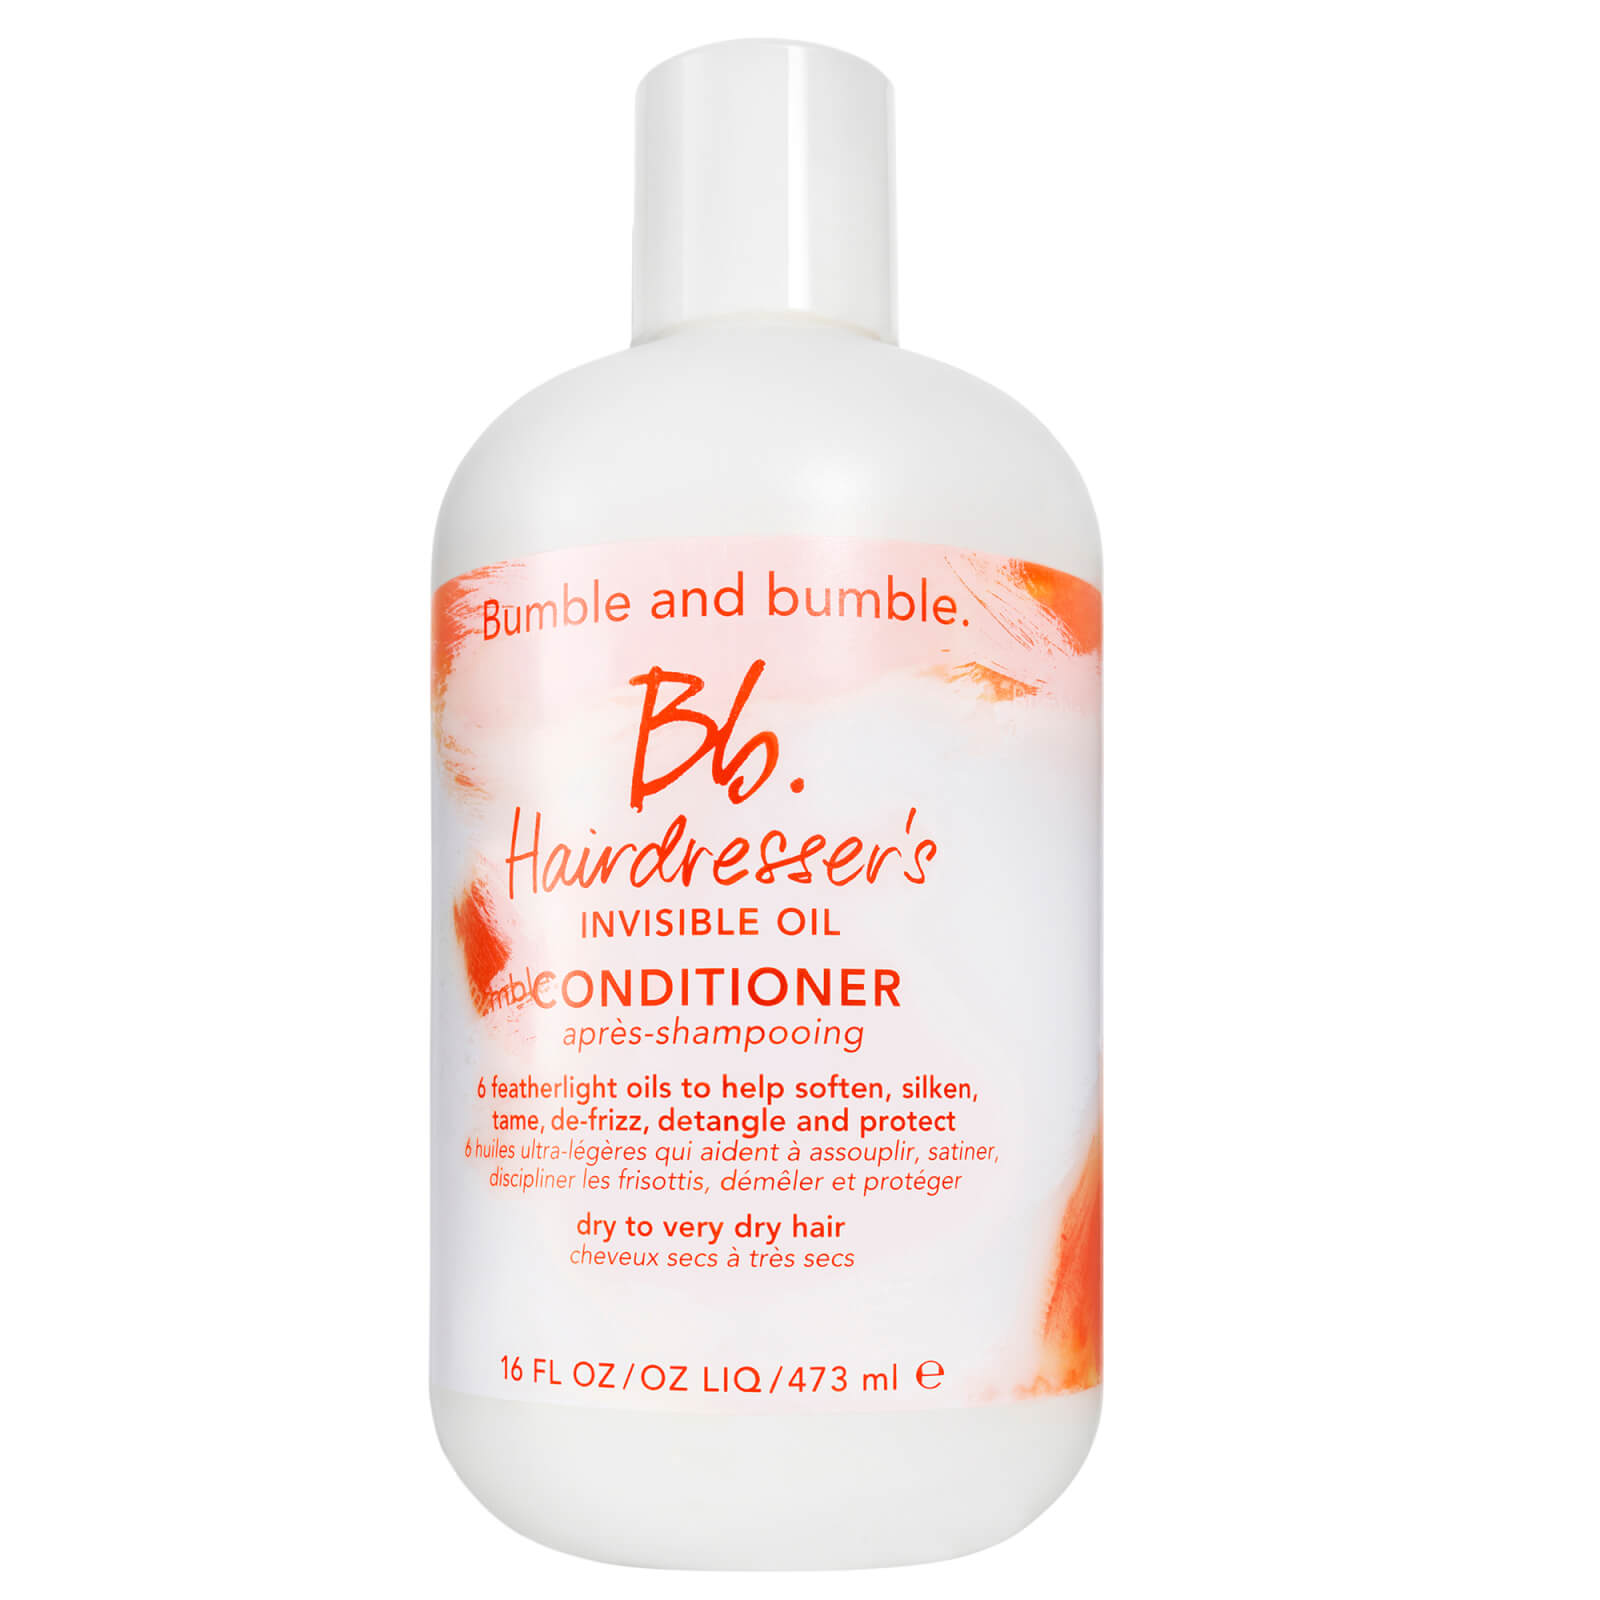 Bumble and bumble Hairdresser's Invisible Oil Conditioner Jumbo 473ml